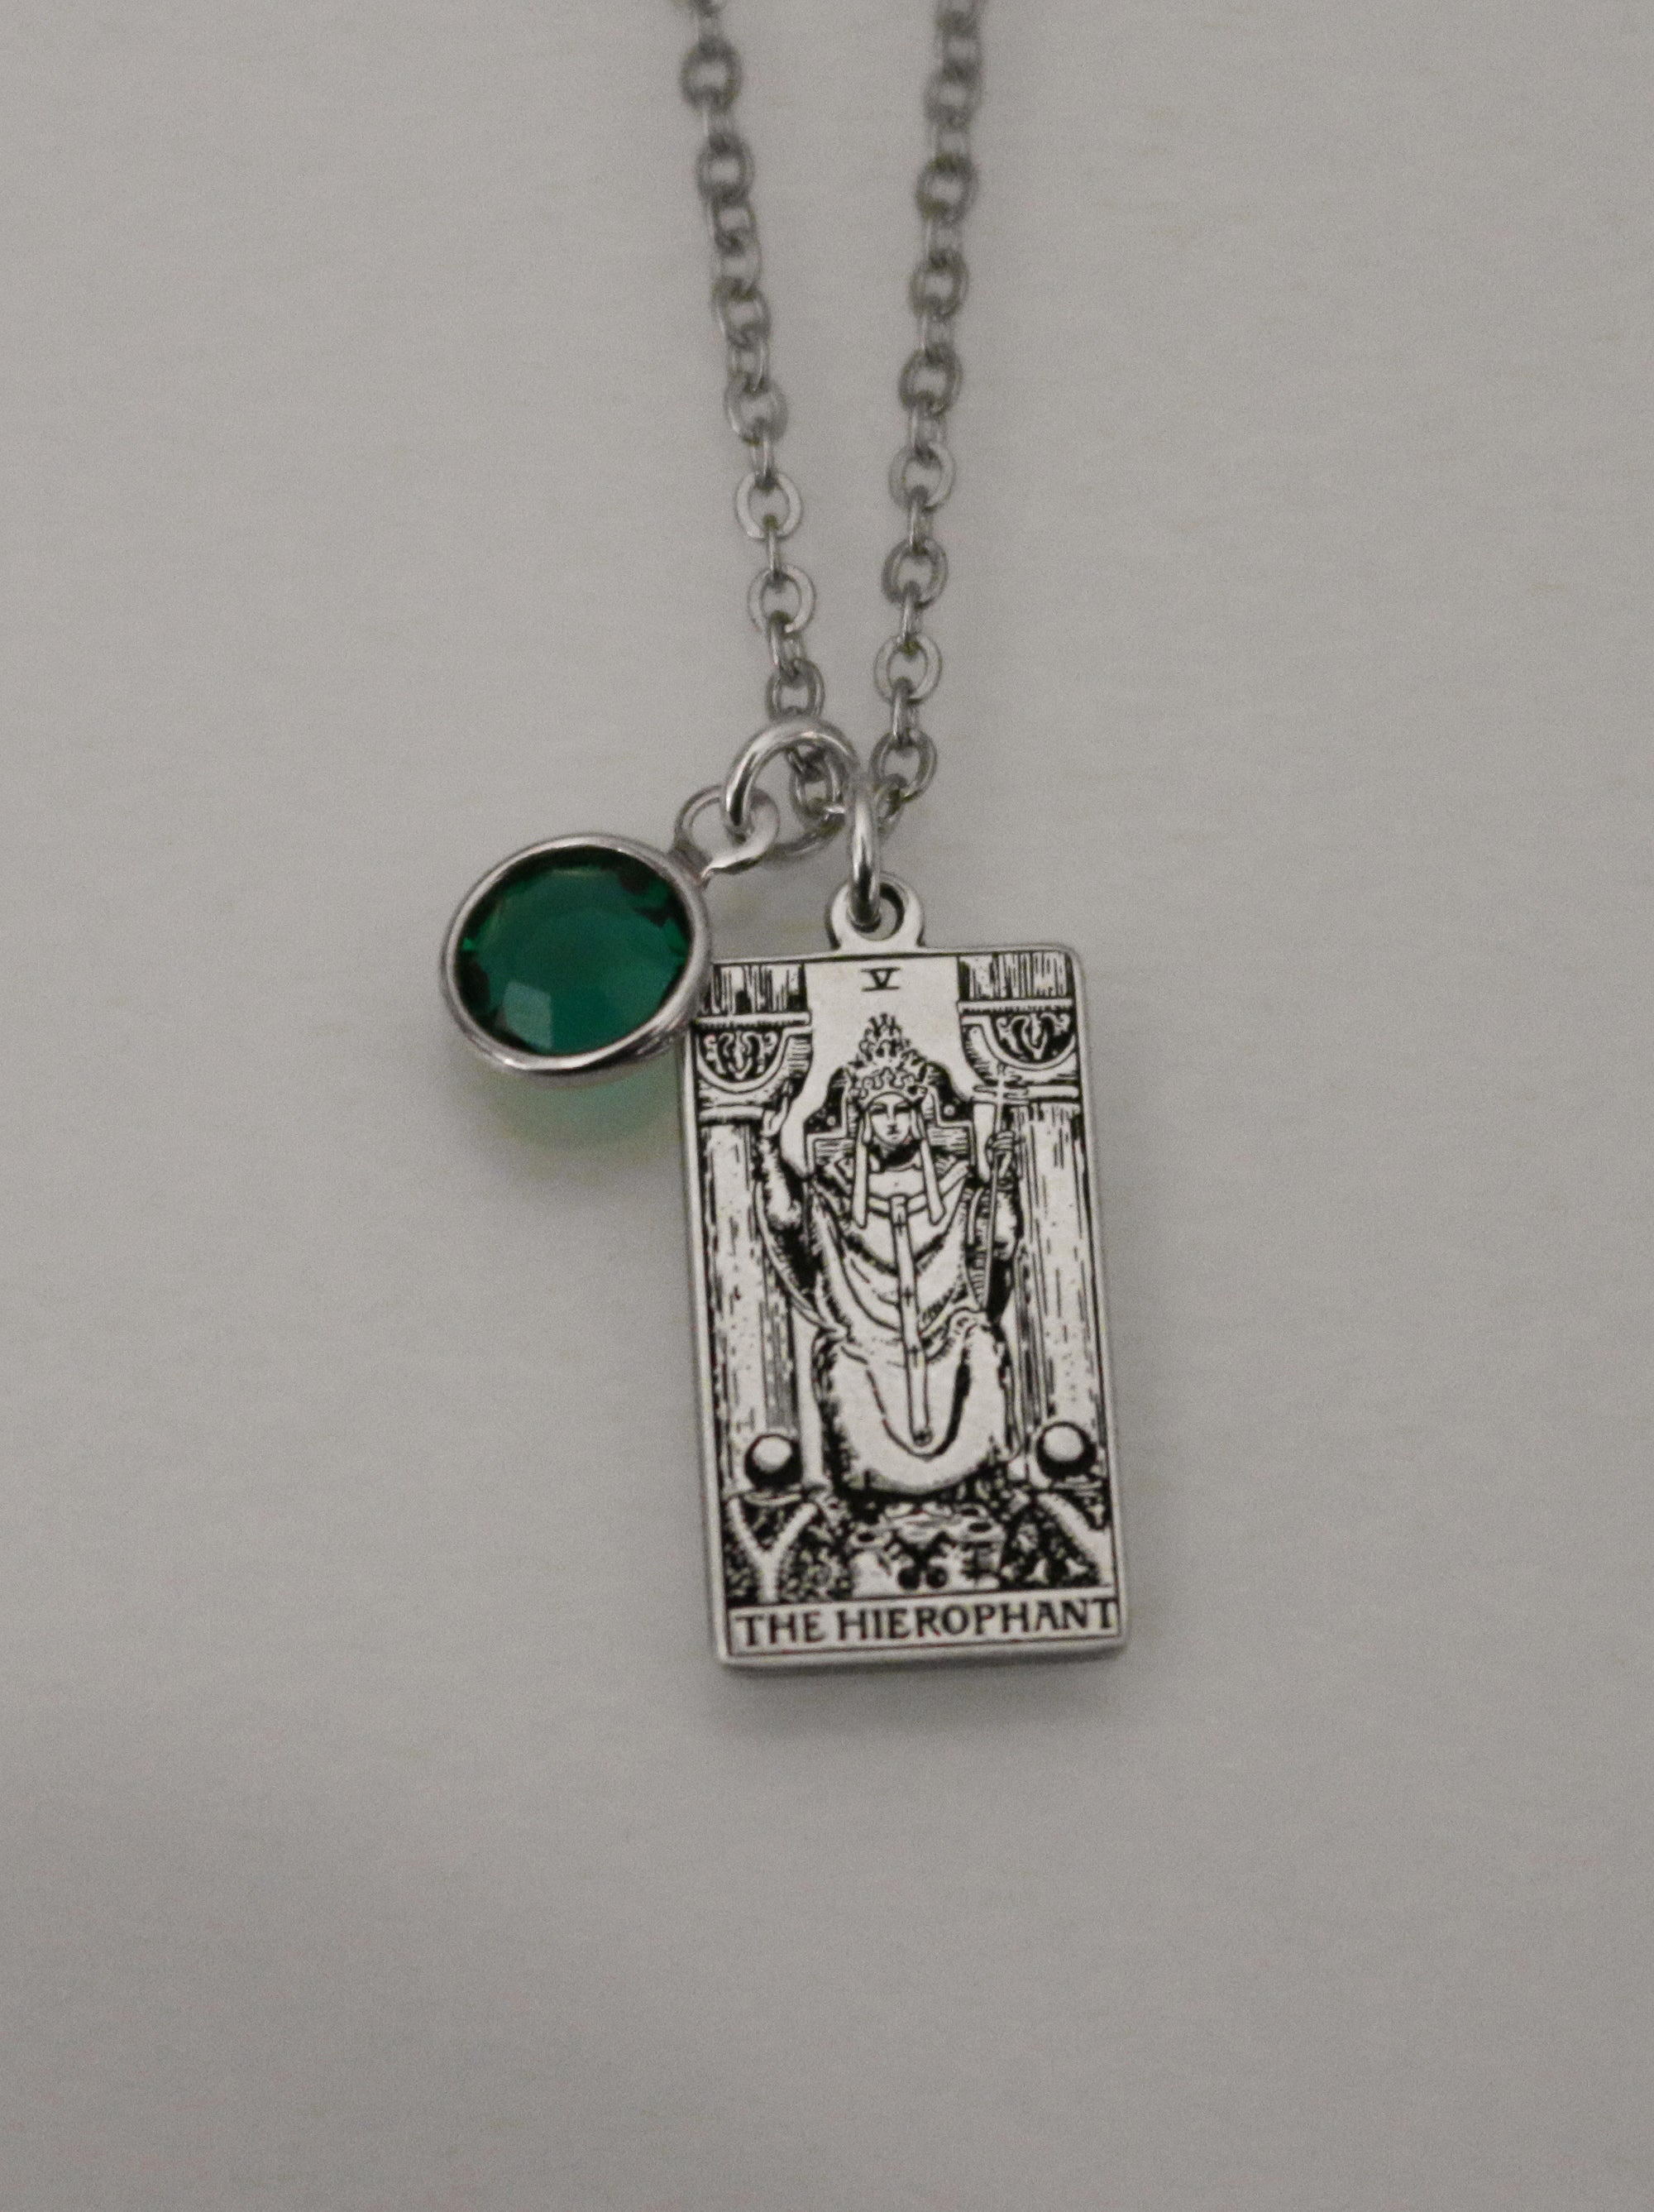 22 CARDS: Birthstone The Major Arcana Dainty Tarot Card Necklace - Sterling Silver